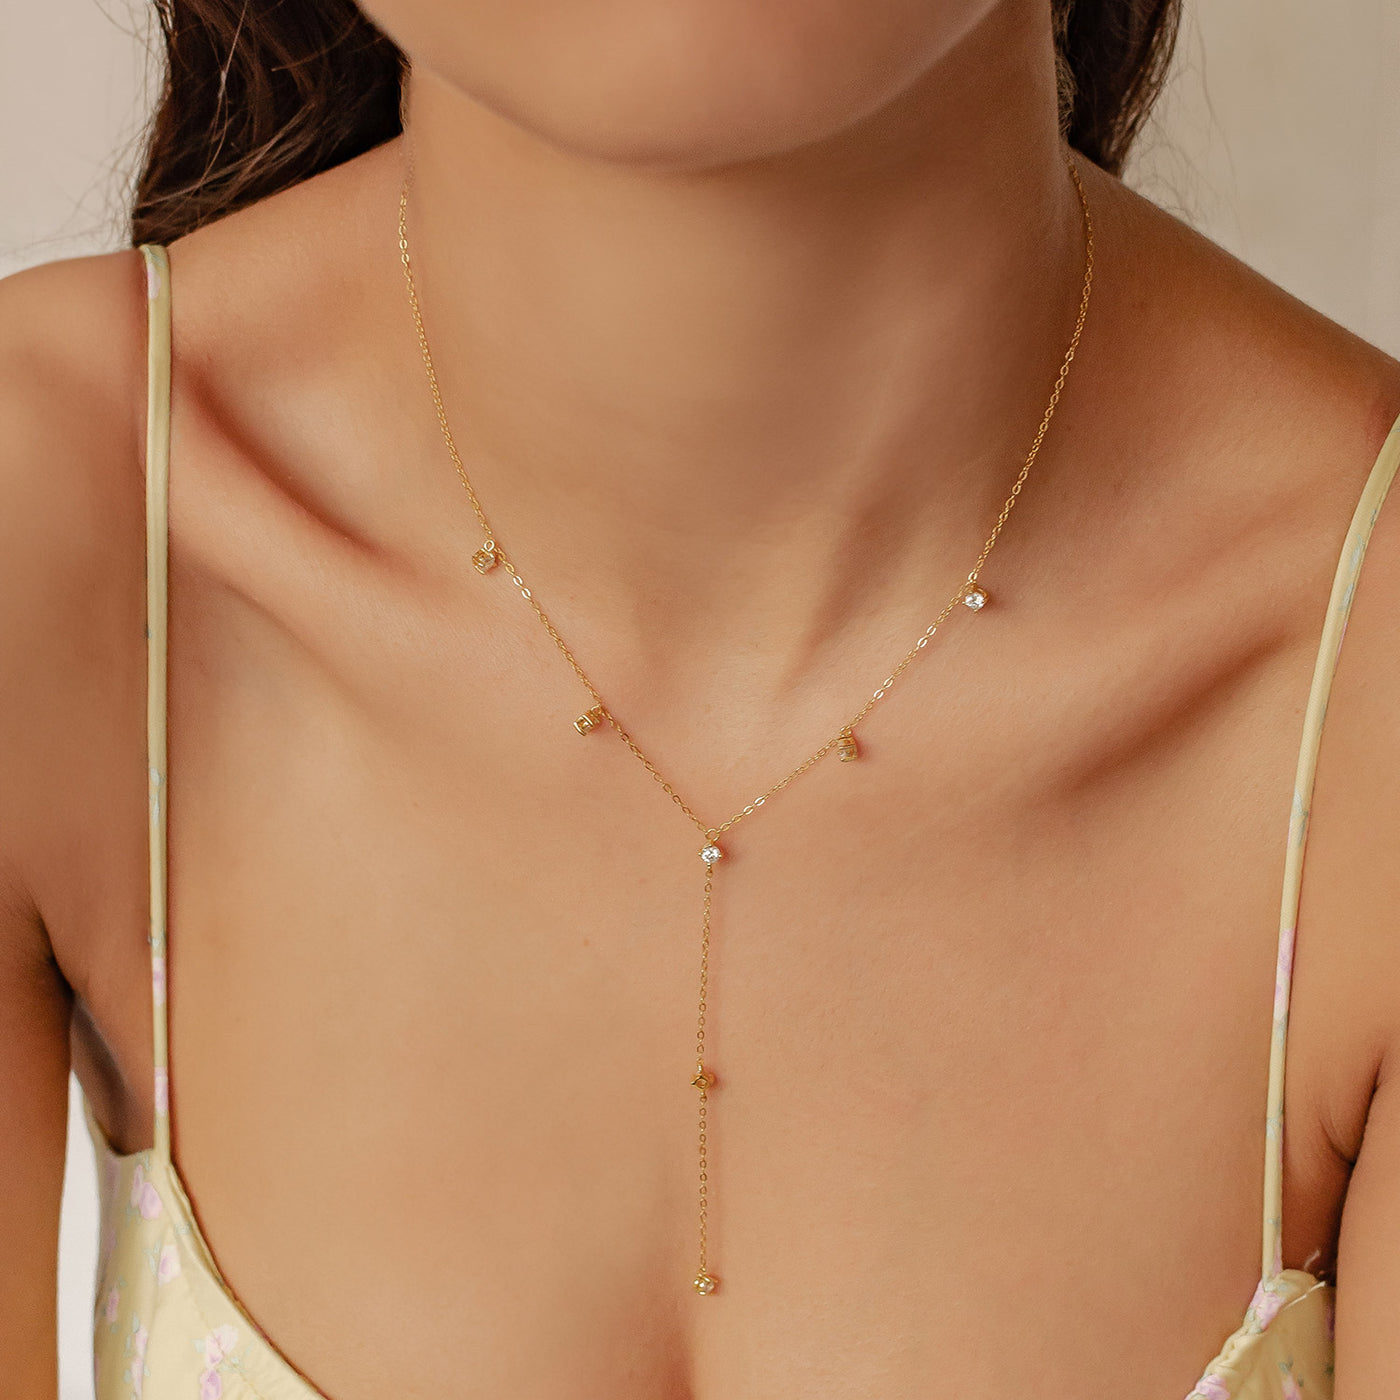 Ellipse Y Chain Necklace Sterling Silver Gold